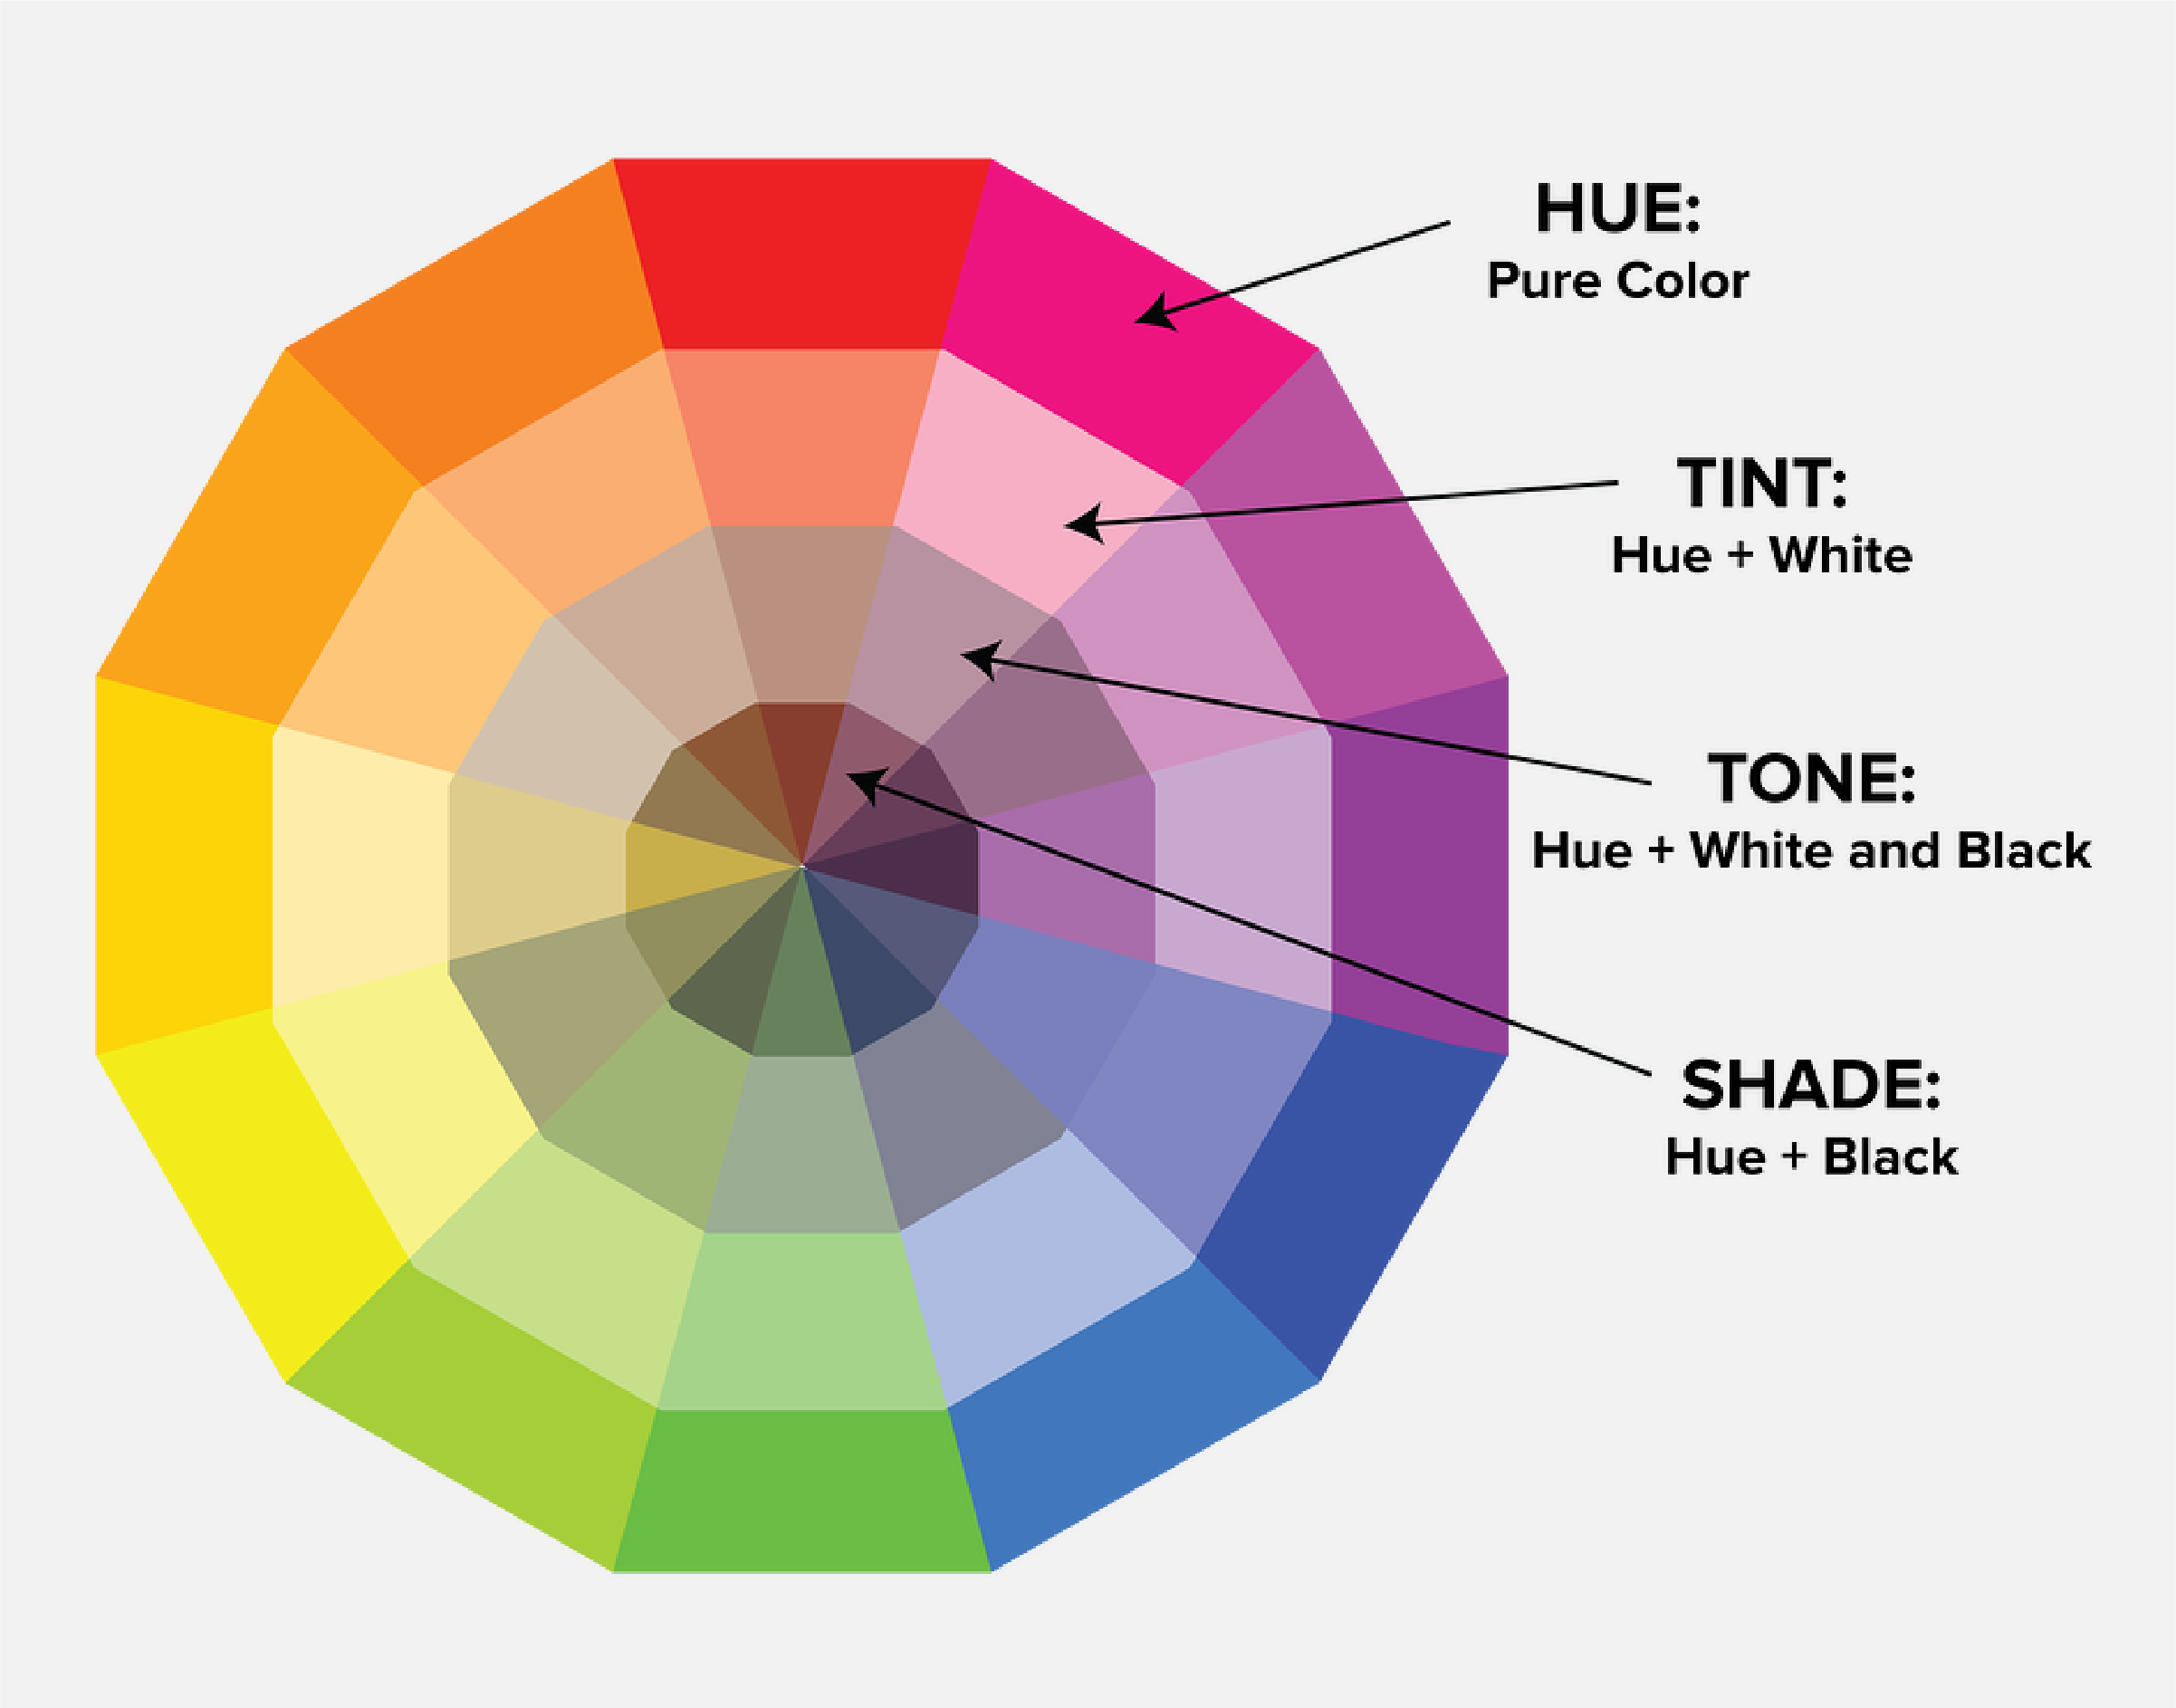 A color wheel is a helpful tool for understanding color and its relationships